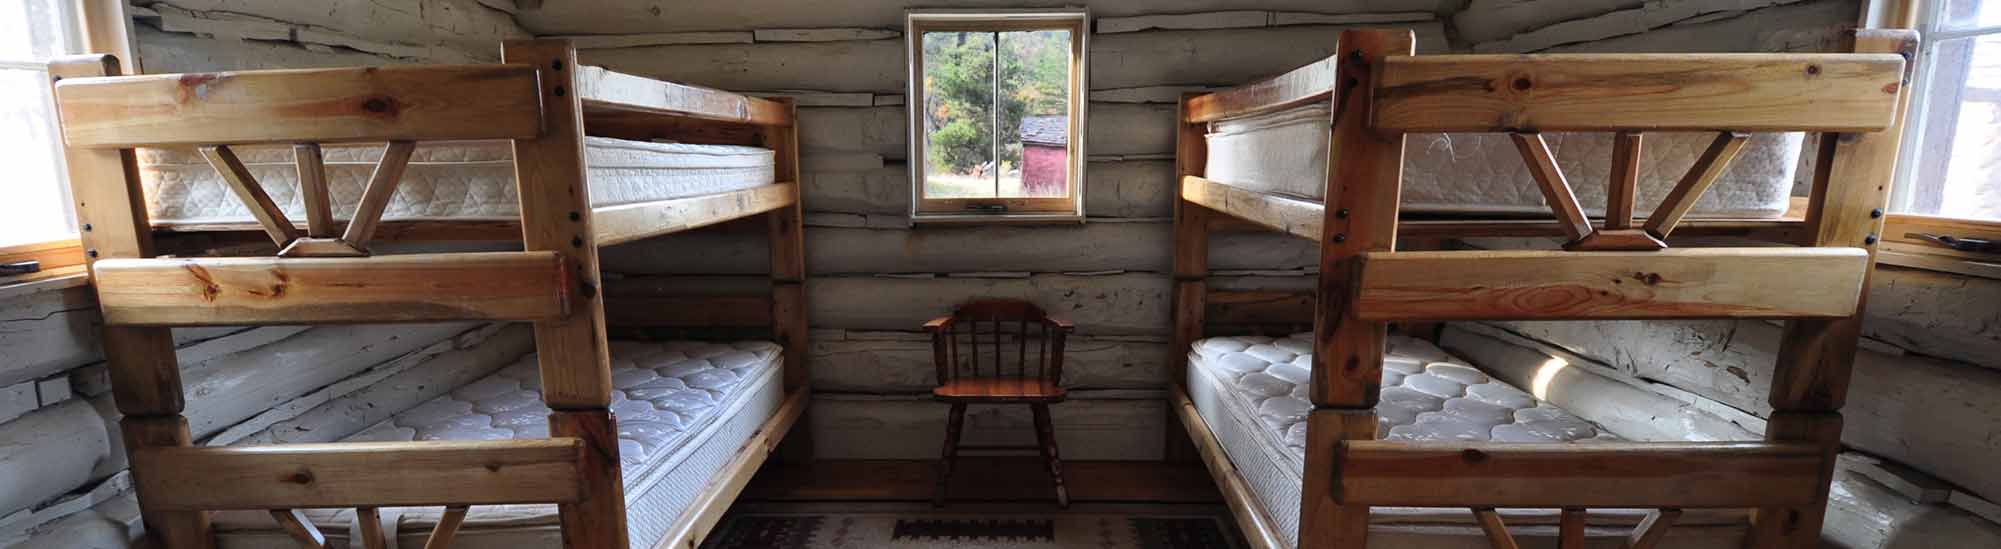 Two bunk beds inside a cabin.